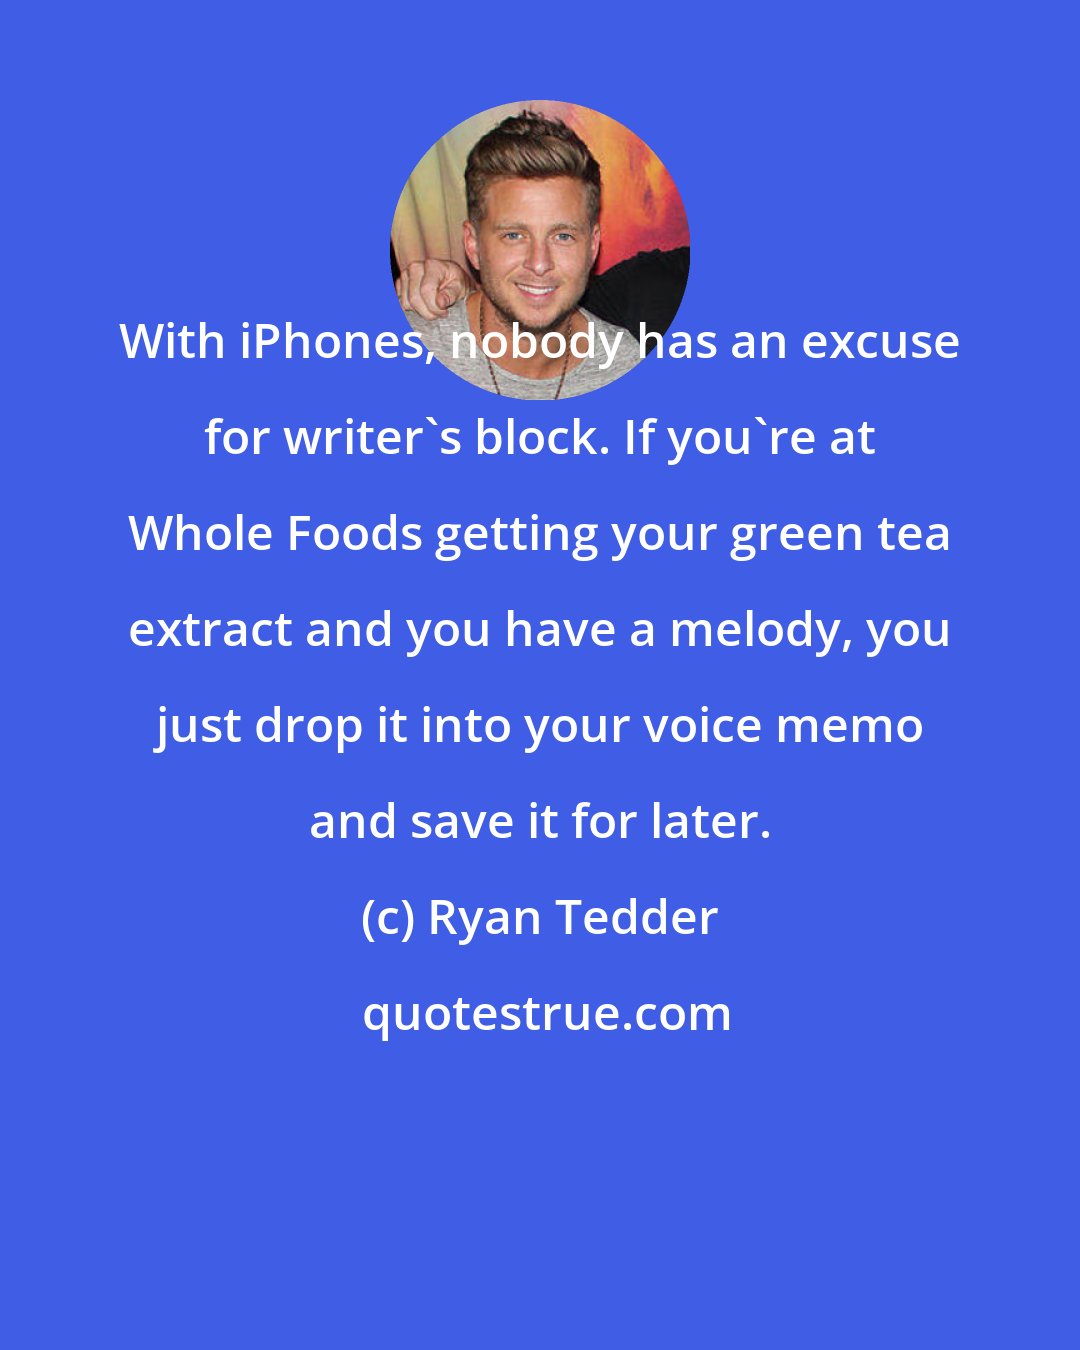 Ryan Tedder: With iPhones, nobody has an excuse for writer's block. If you're at Whole Foods getting your green tea extract and you have a melody, you just drop it into your voice memo and save it for later.